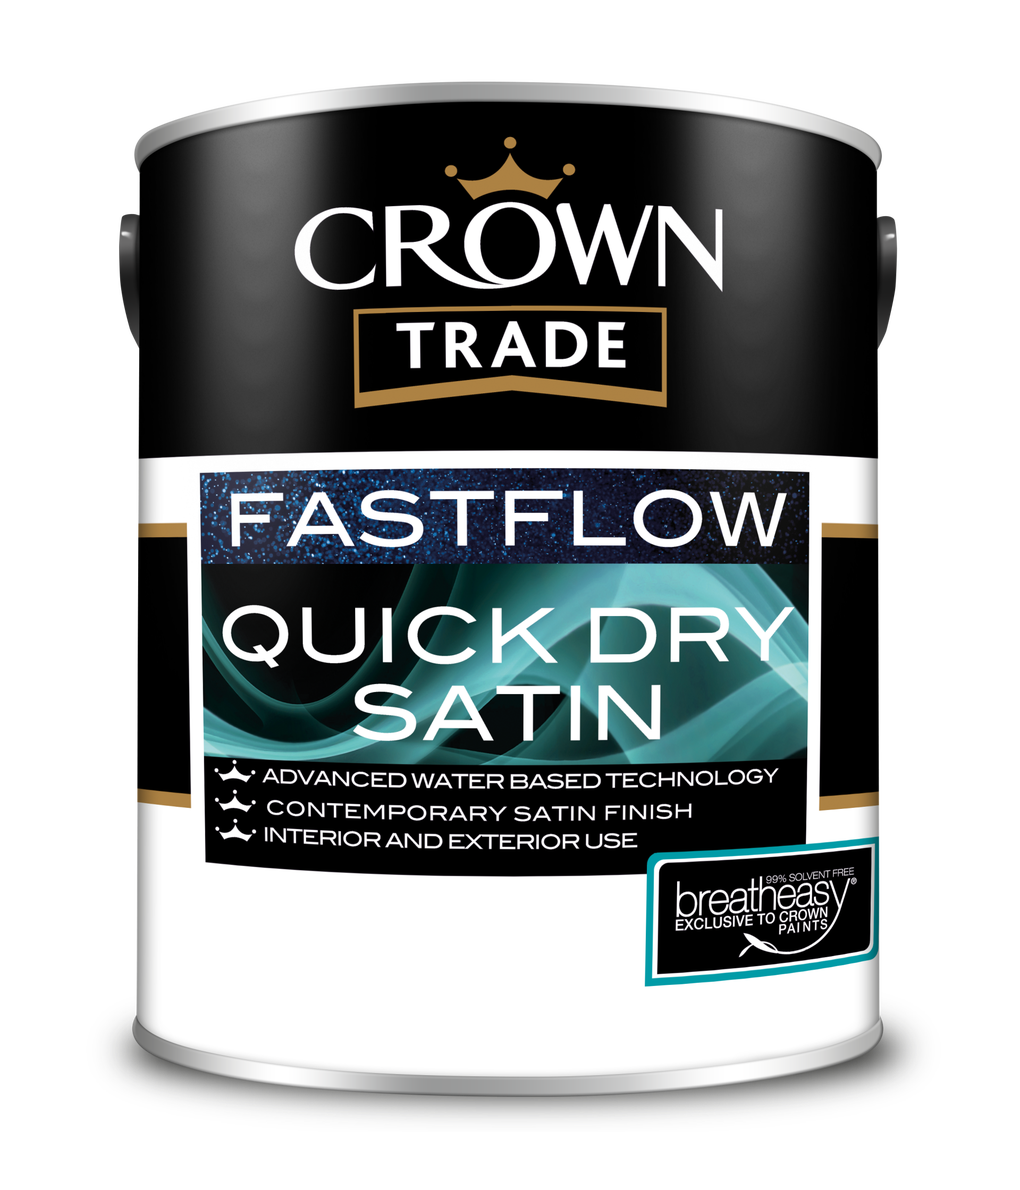 Crown Trade Colour Mixed Fastflow Quick Dry Satin